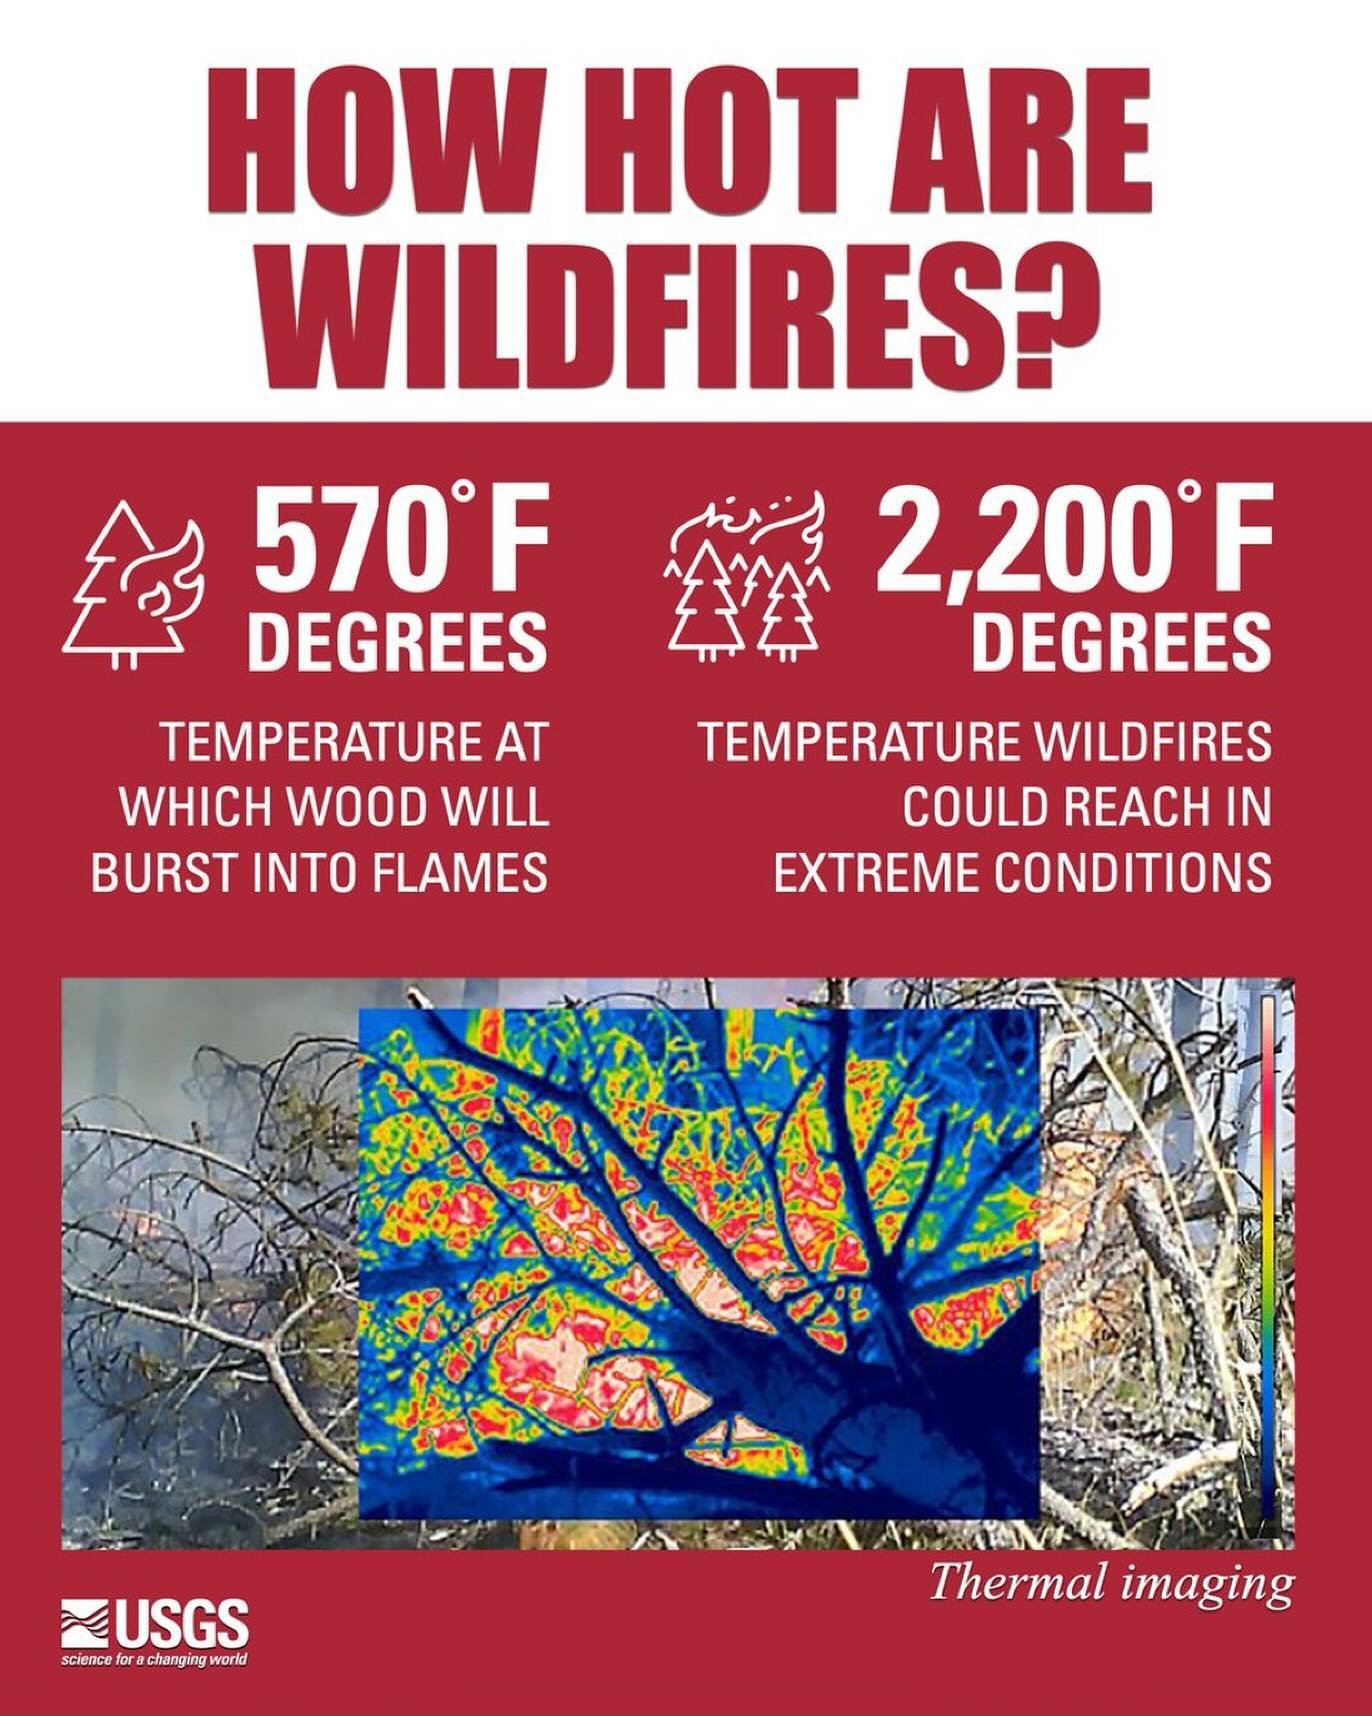 Were you ever curious about how hot wildfires get? Wildfires often range between 1,200 degrees and 2,000 degrees Fahrenheit, with some extreme conditions driving temperatures over 2,200 degrees Fahrenheit. That is about 1/5 the temperature of the sun